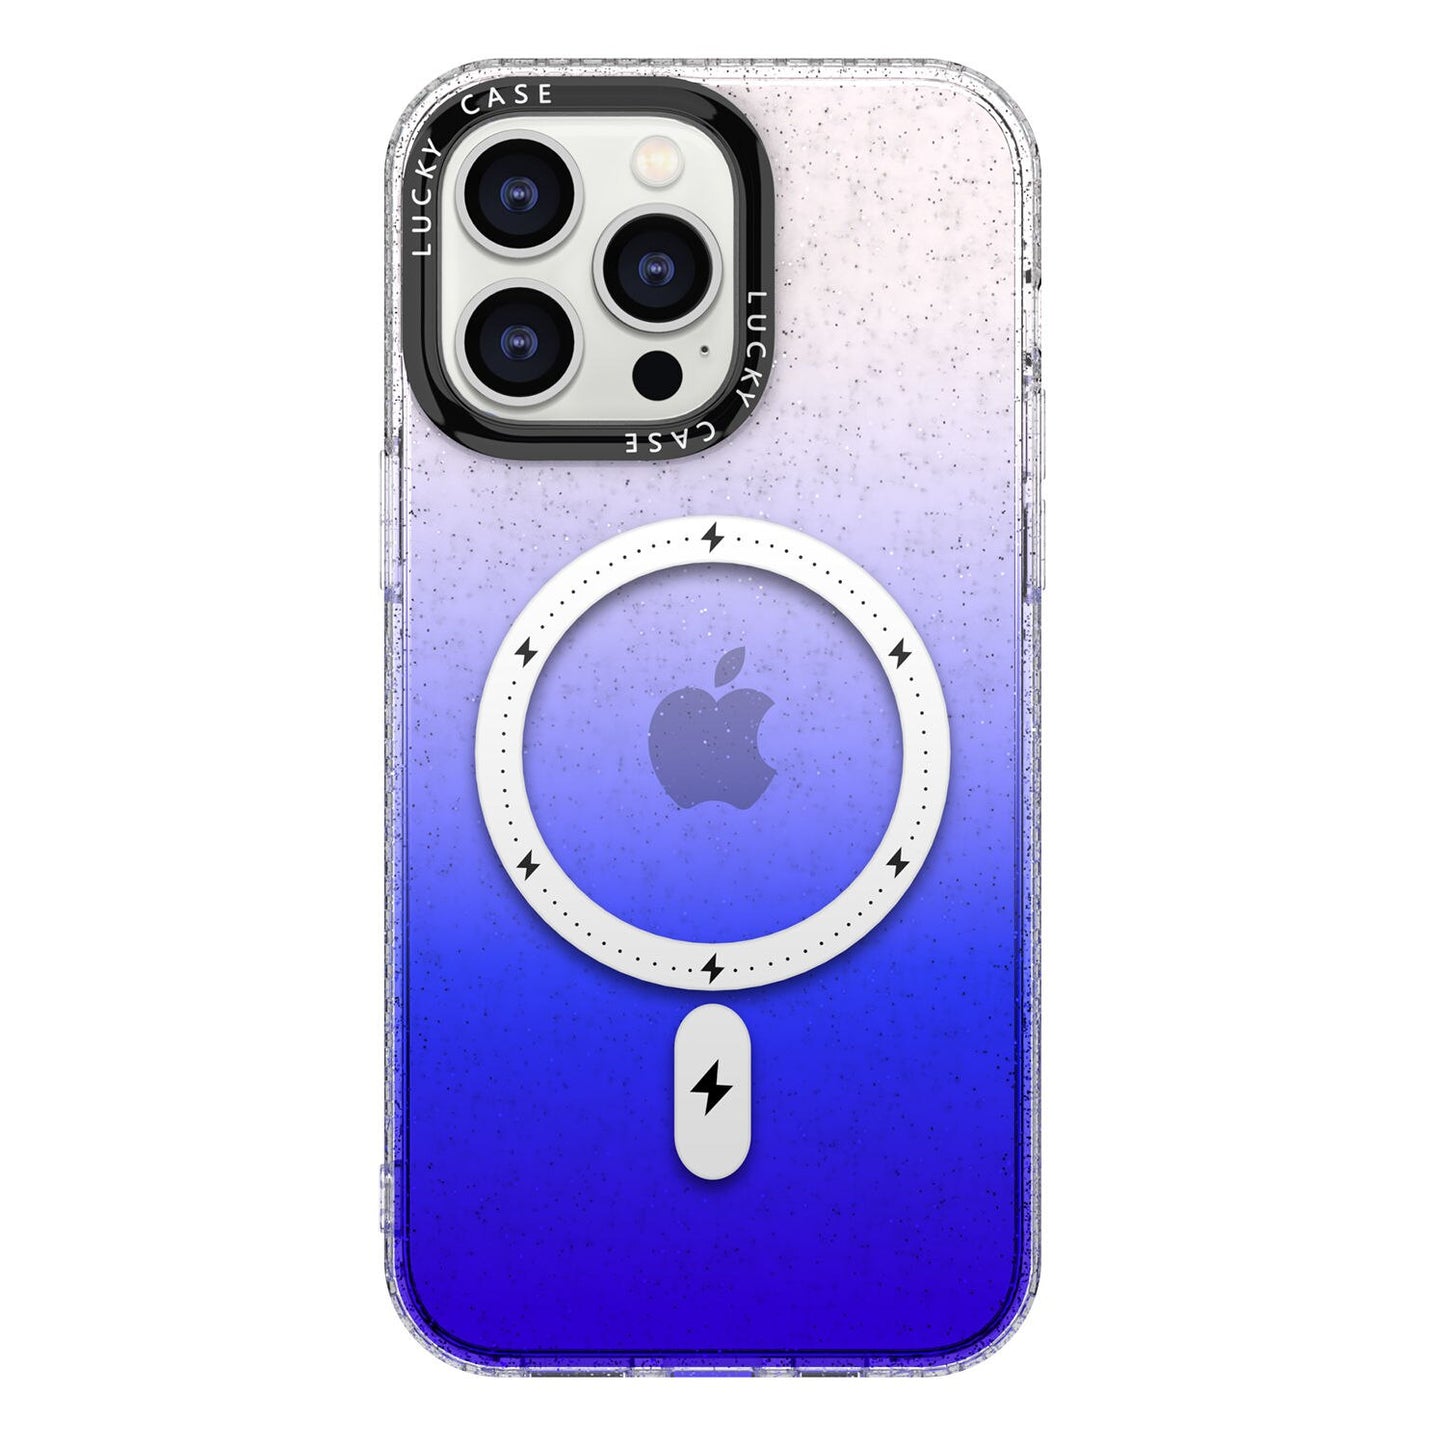 Magnetic Bling Case for iPhone 14 13 12 Pro Max Support for MagSafe Cute Twinkle Glitter Design Shockproof Silicone Phone Cover - For iPhone 12 12 Pro / Blue / China - For iPhone 12 ProMax / Blue / China - For iPhone 13 / Blue / China - For iPhone 13 Pro / Blue / China - For iPhone 13 ProMax / Blue / China - For iPhone 14 / Blue / China - For iPhone 14 Plus / Blue / China - For iPhone 14 Pro / Blue / China - For iPhone 14 ProMax / Blue / China - For iPhone 12 12 Pro / Blue / United States - F...